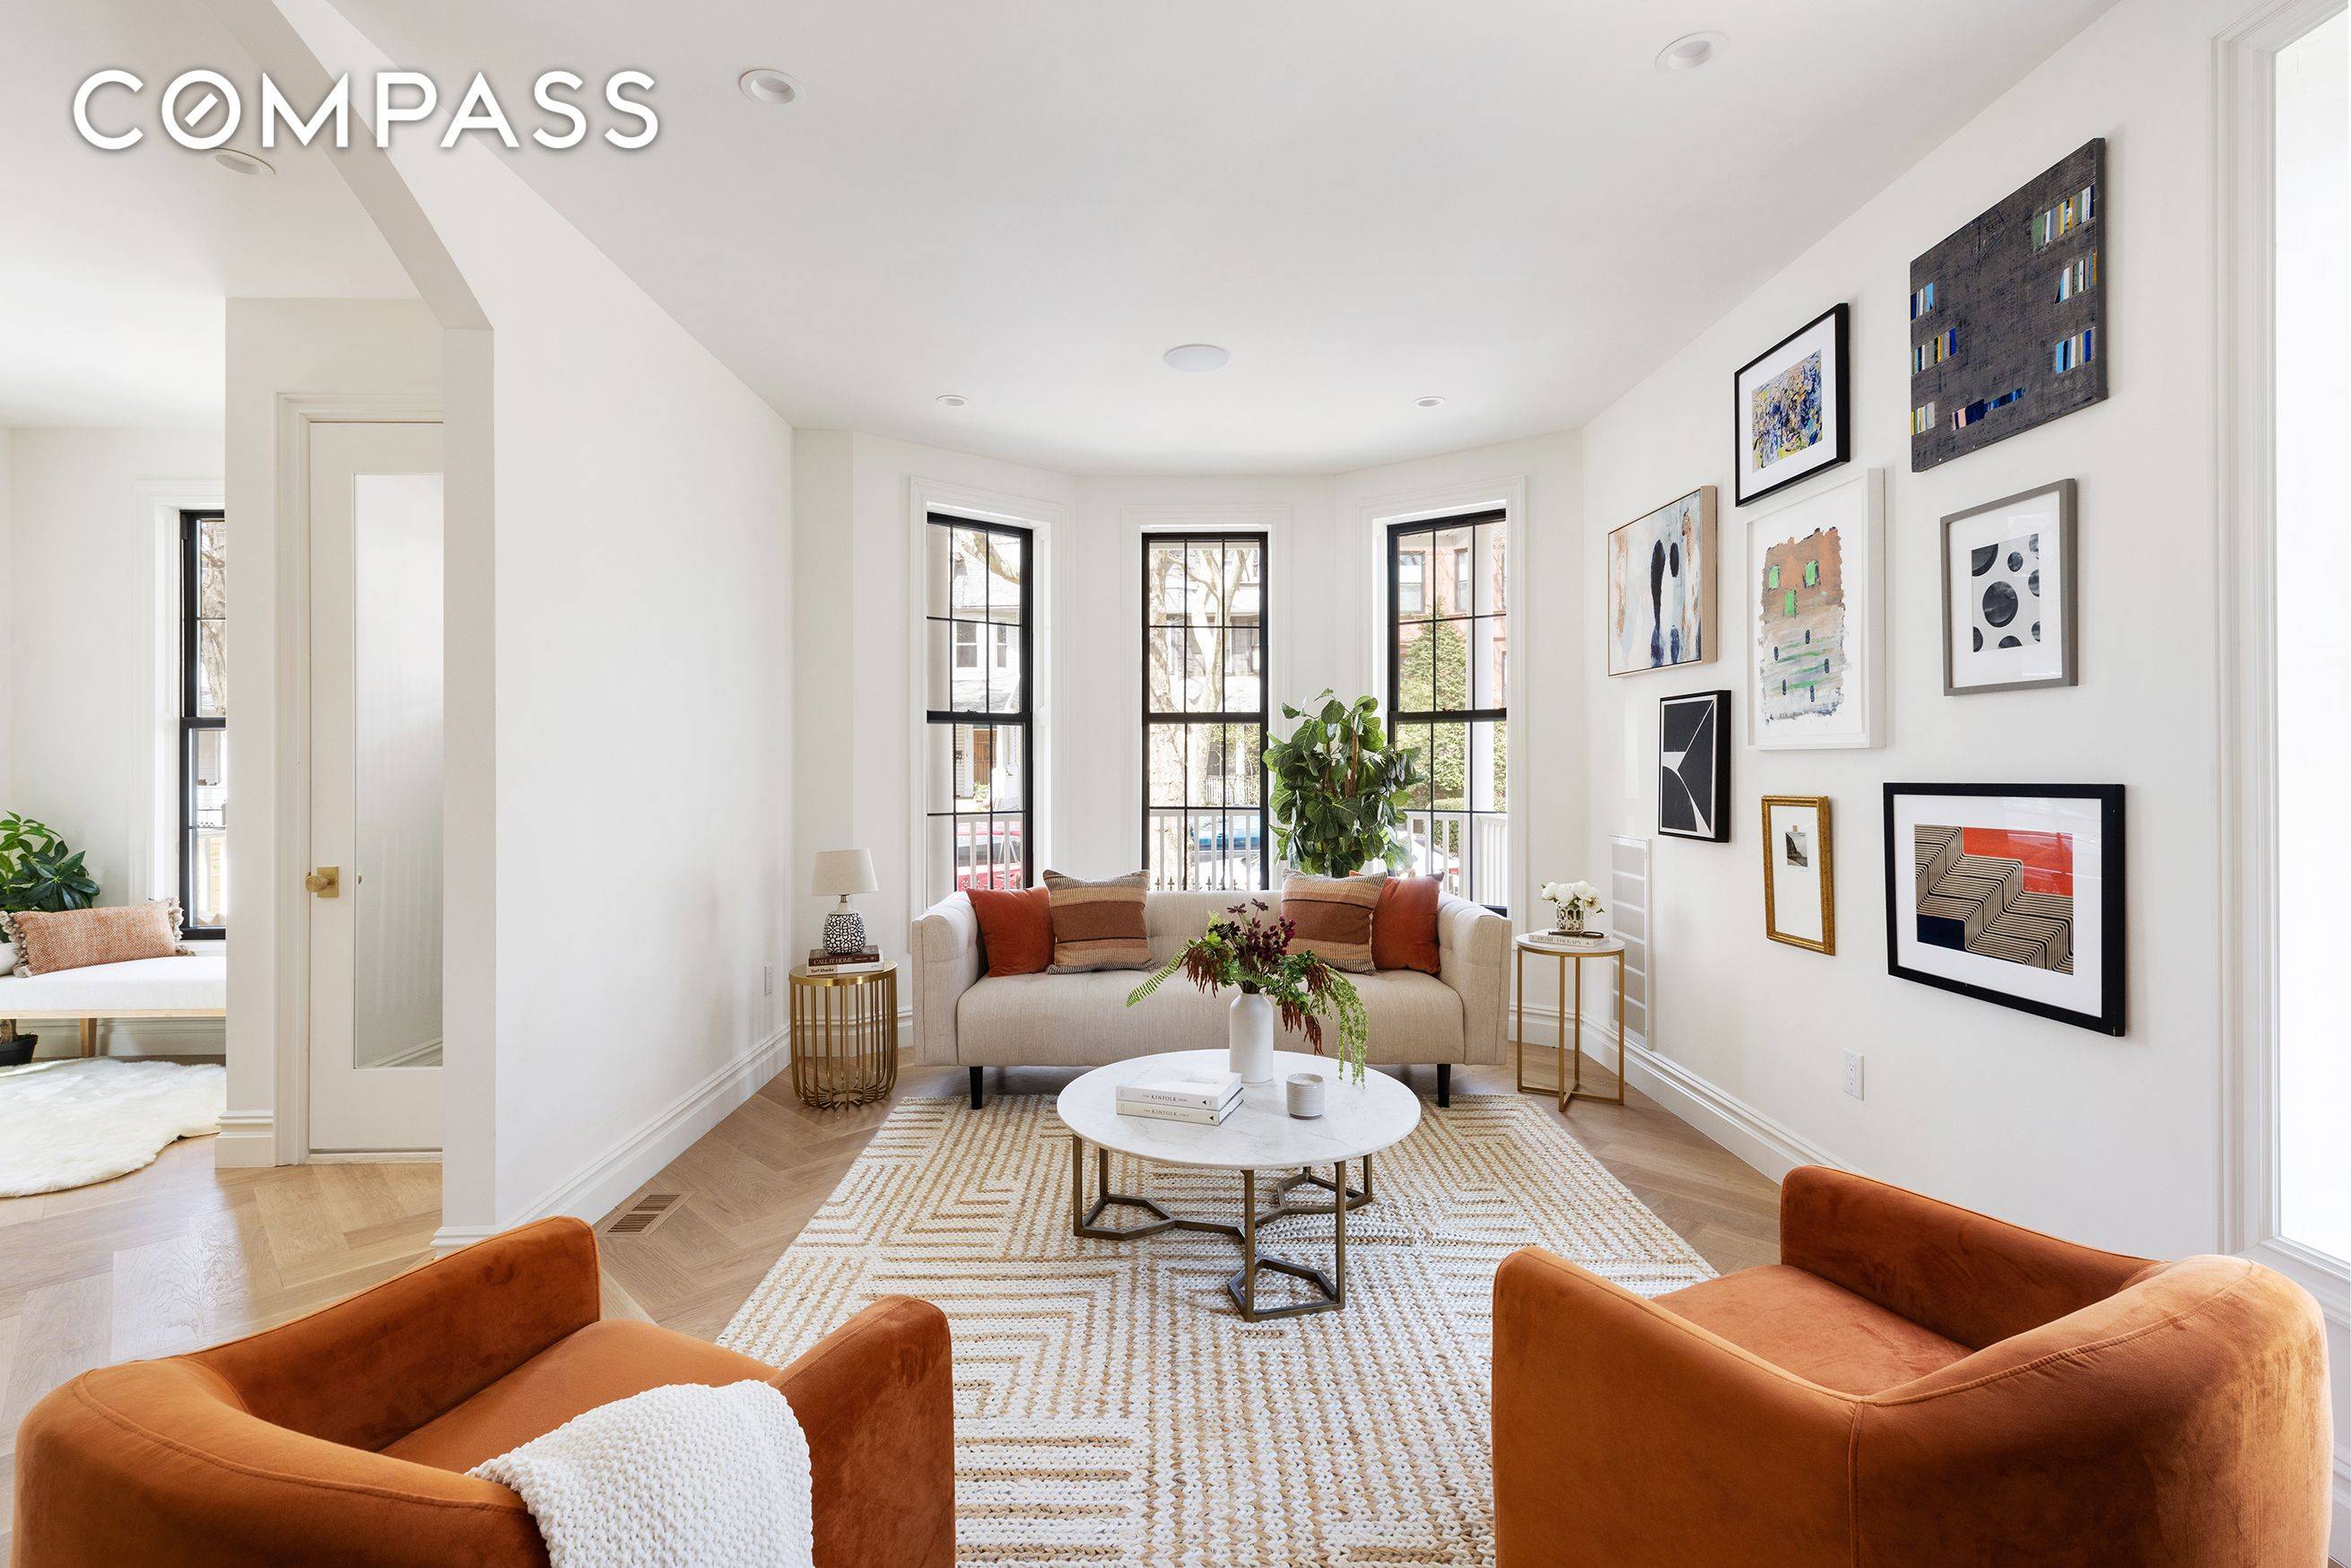 Welcome to 246 Fenimore, originally constructed in 1910, this newly renovated townhouse pays homage to its rich history while offering the epitome of contemporary living.